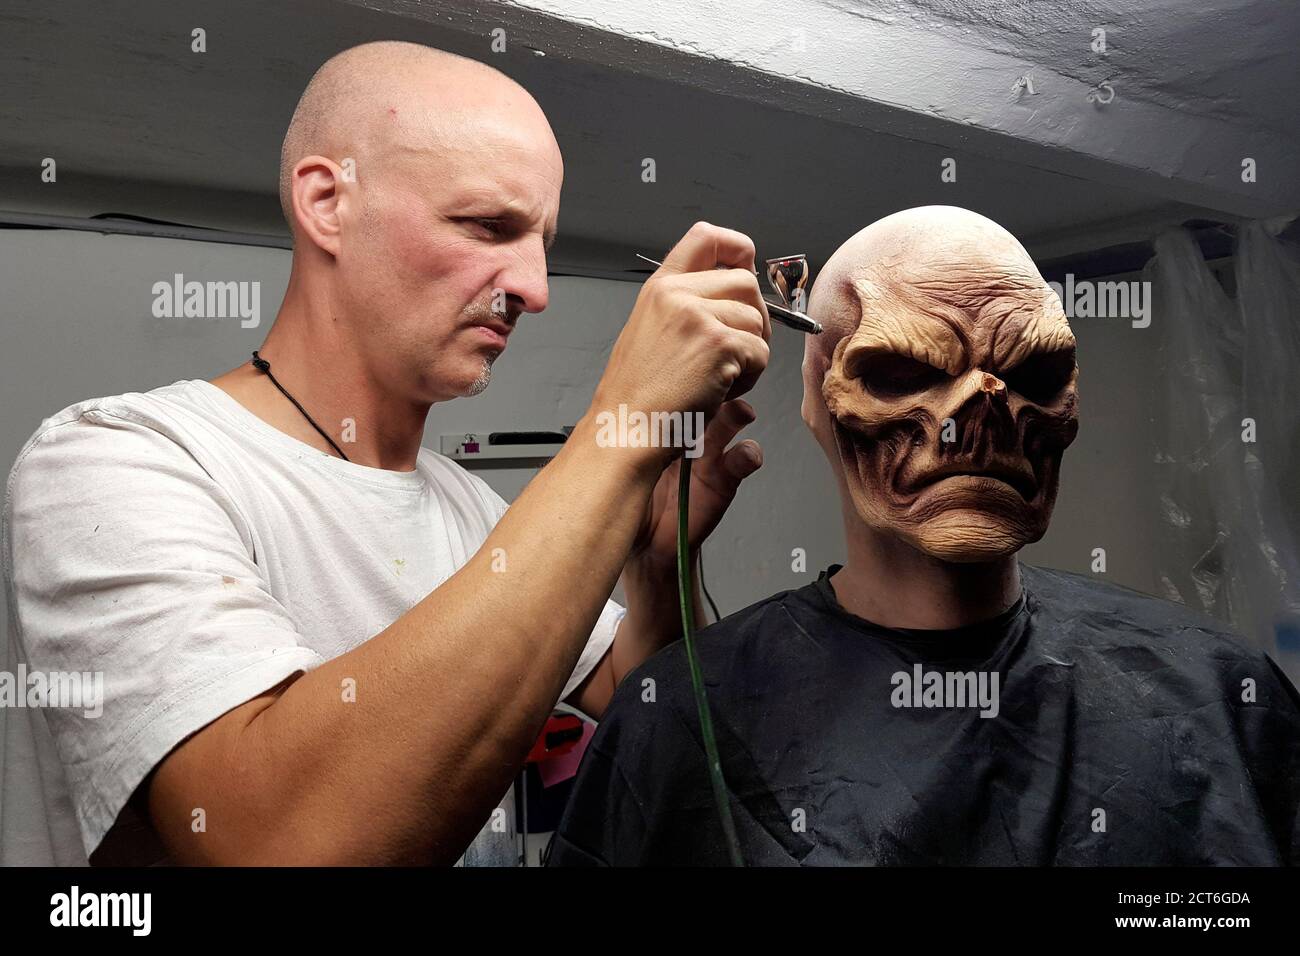 GEEK ART - Bodypainting and Transformaking: Enrico Lein with Patrick Kiel preparing for Captain America vs. Red Skull photoshooting in Hamelin on September 20, 2020 - A project by the photographer Tschiponnique Skupin and the bodypainter Enrico Lein Stock Photo